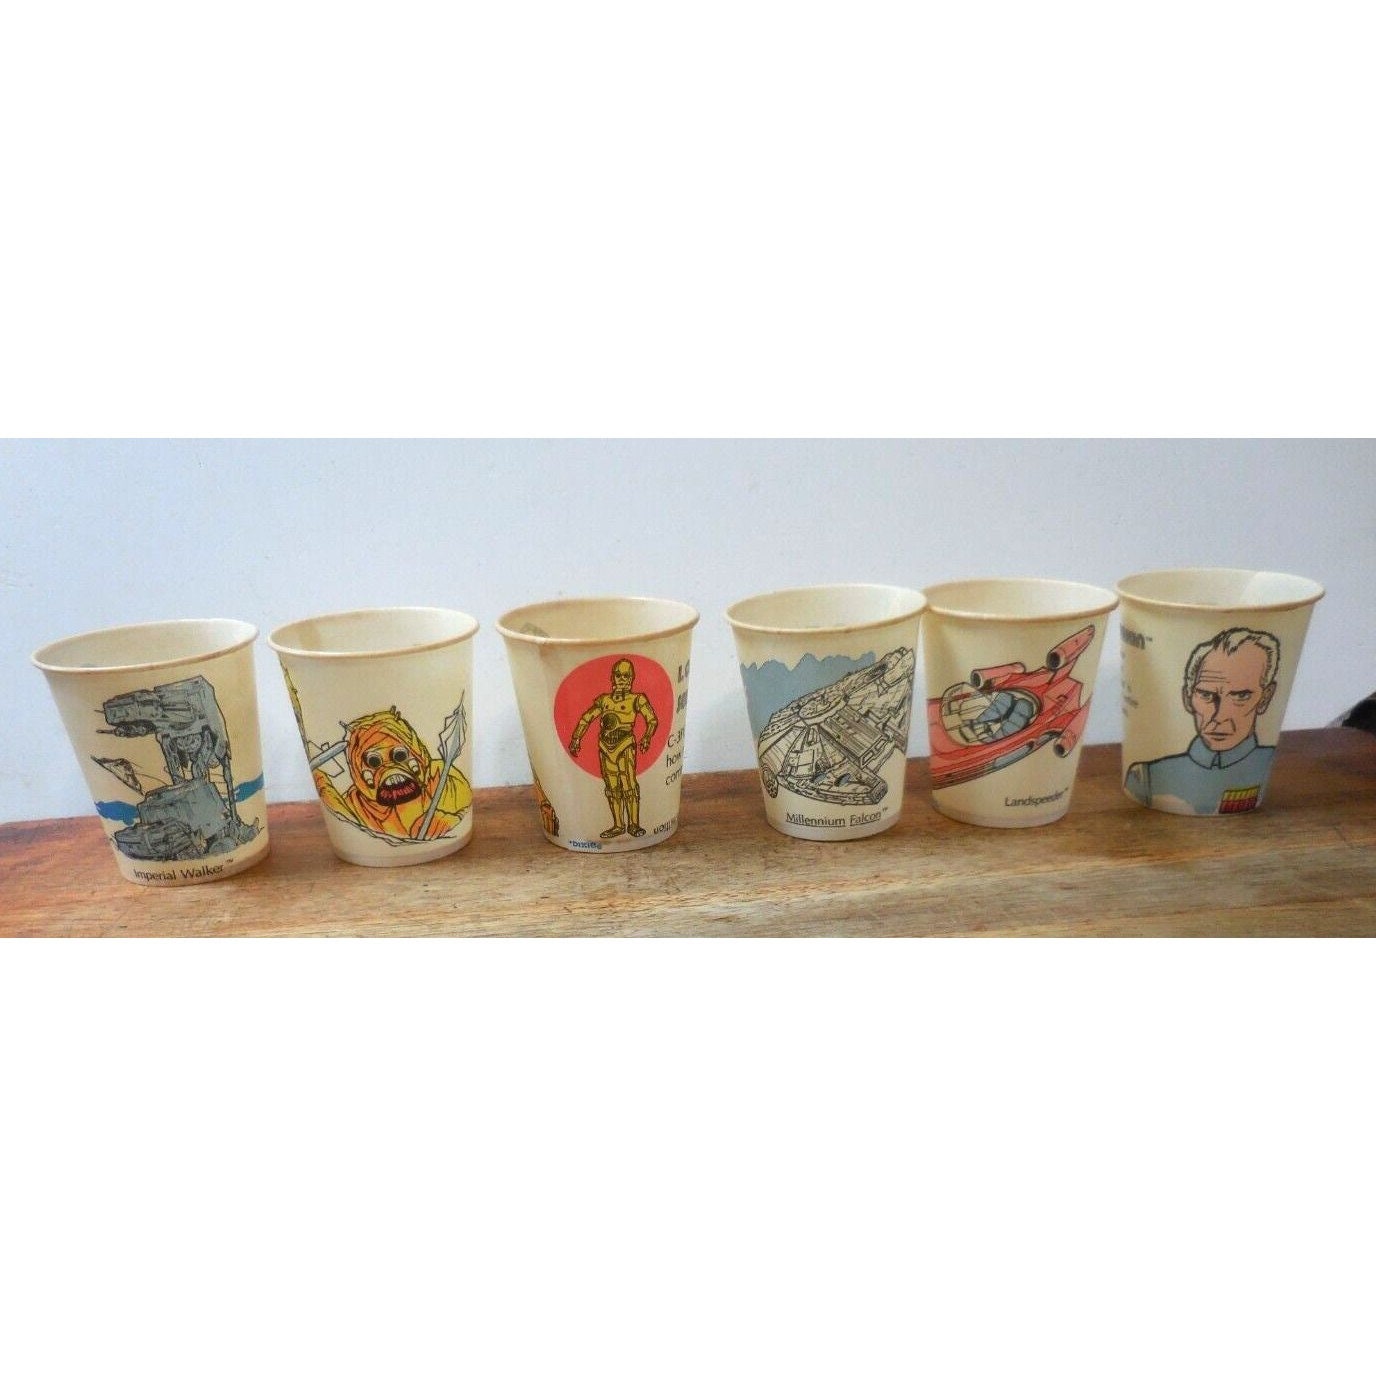 1970s Dixie Cups Jr. Star Wars/empire Strikes Back Wax Cups 